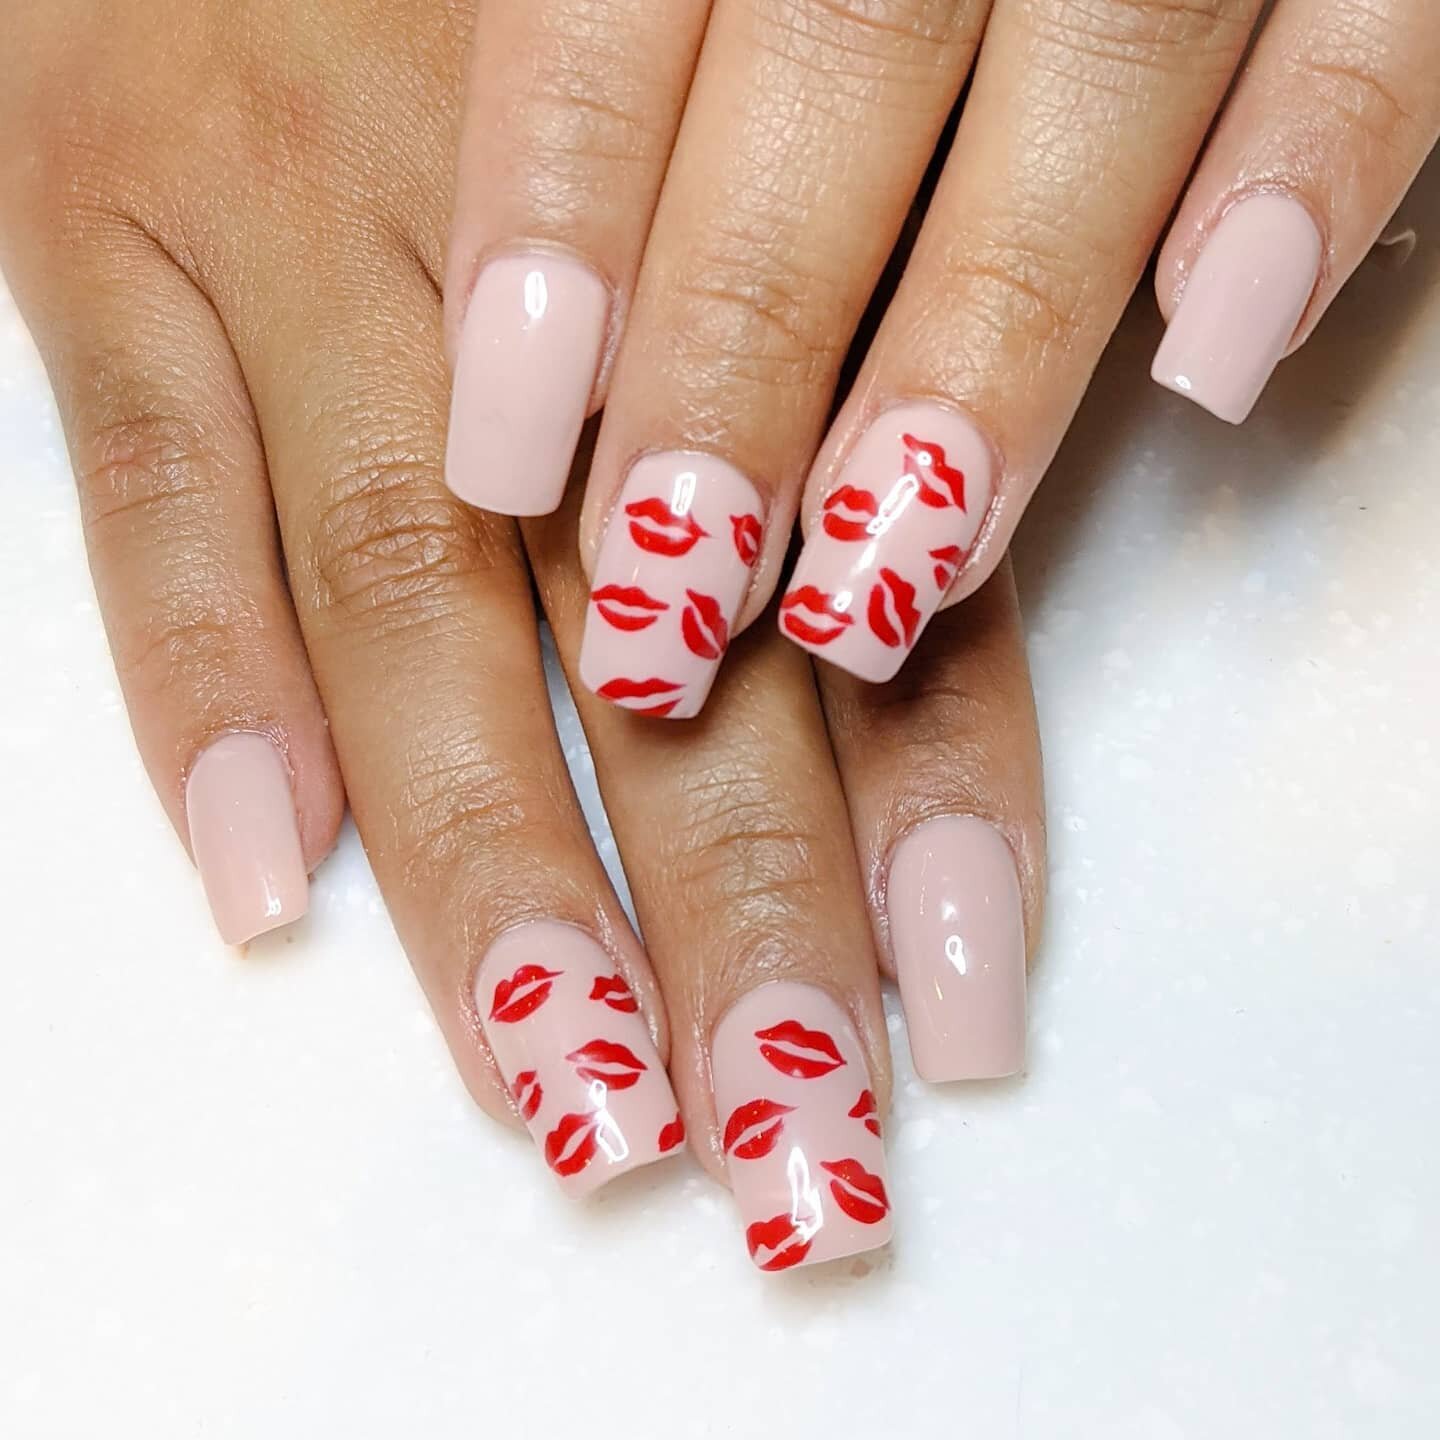 ⁠
Let the Valentines inspo BEGIN 💋💋⁠
.⁠
Book ahead for your Valentines Day appointments, if you have any questions please message us. ❤️⁠
_____________________________⁠
🌎 Online booking available!⁠
🖥️ NailSpaeEmsford.com⁠
📱Download our App 'Nail